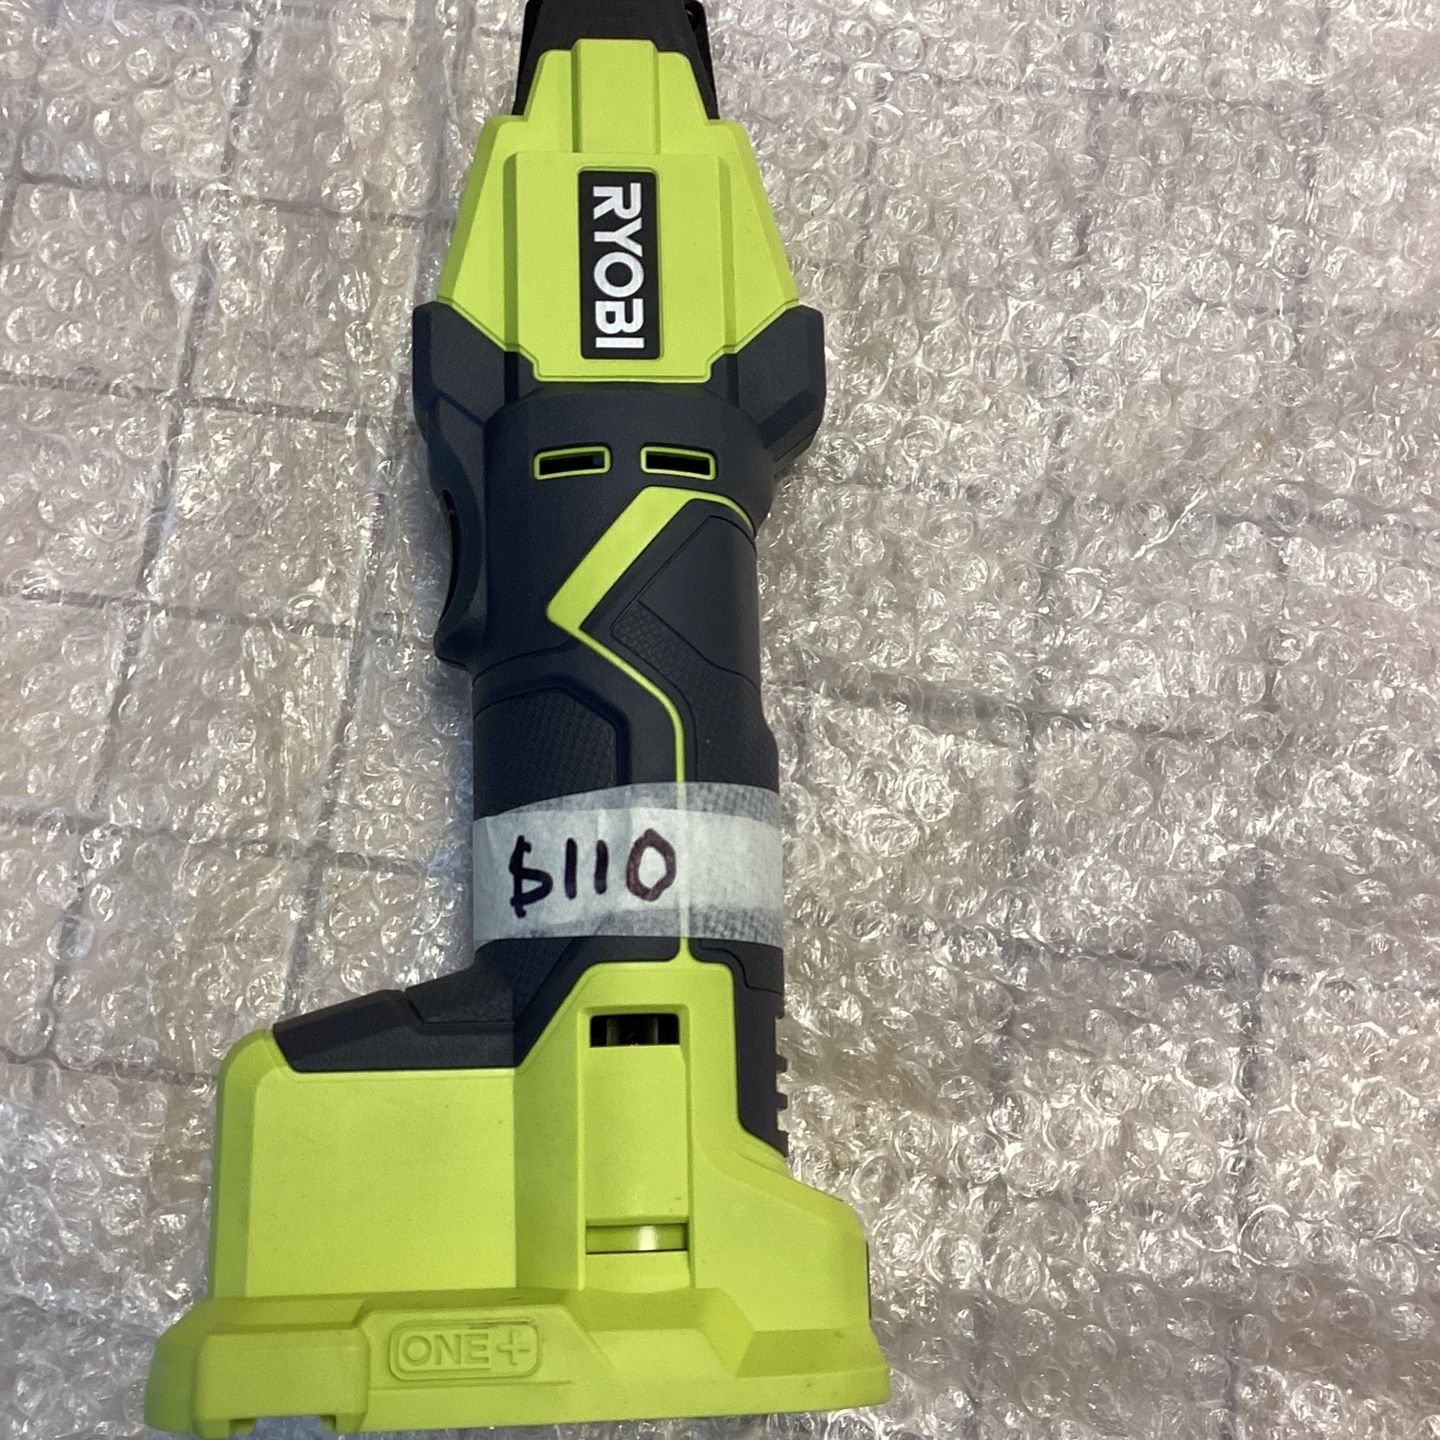 RYOBI ONE+ 18V Lithium-Ion Cordless PEX Tubing Clamp Tool (Tool Only)$110  for Sale in Albuquerque, NM OfferUp